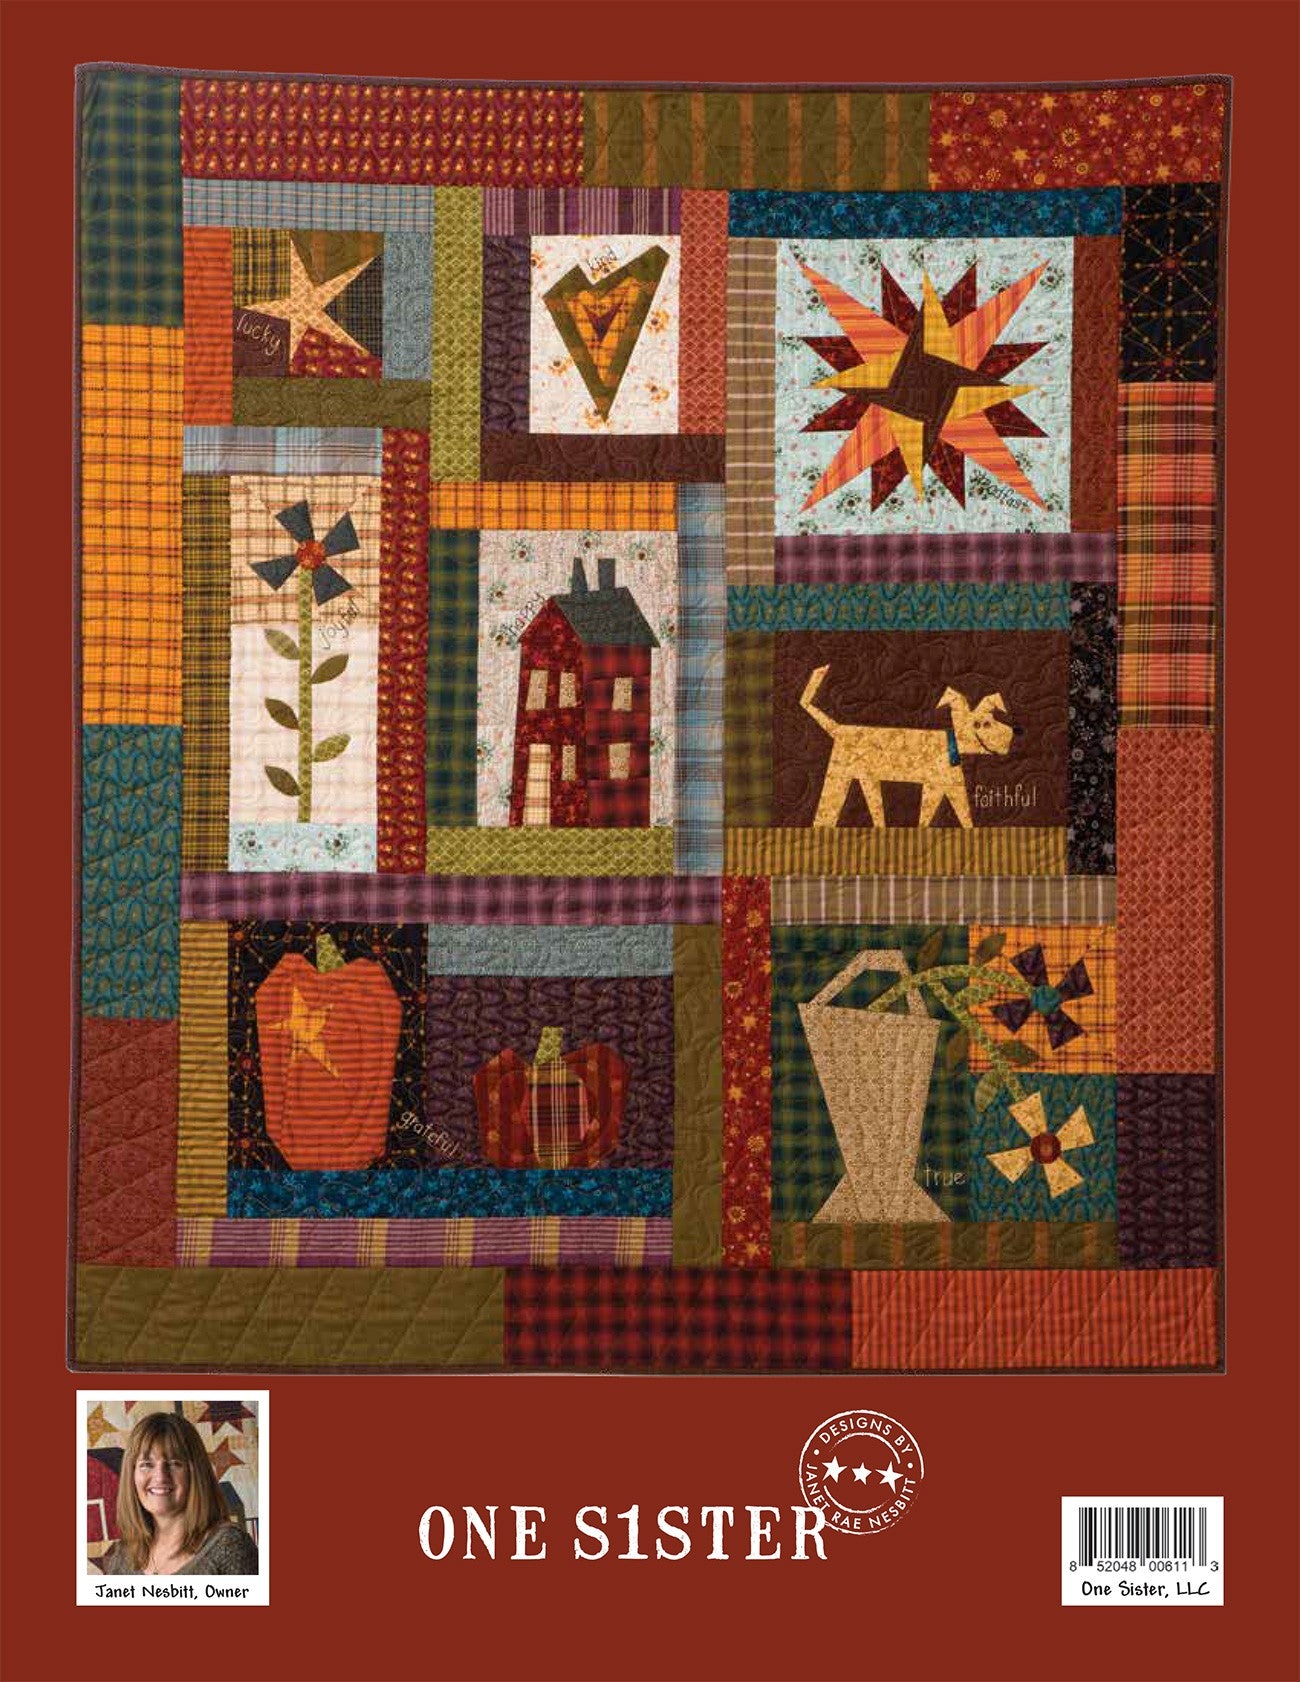 Crazy Good Life Quilt Pattern Book by Janet Nesbitt of One Sister Designs